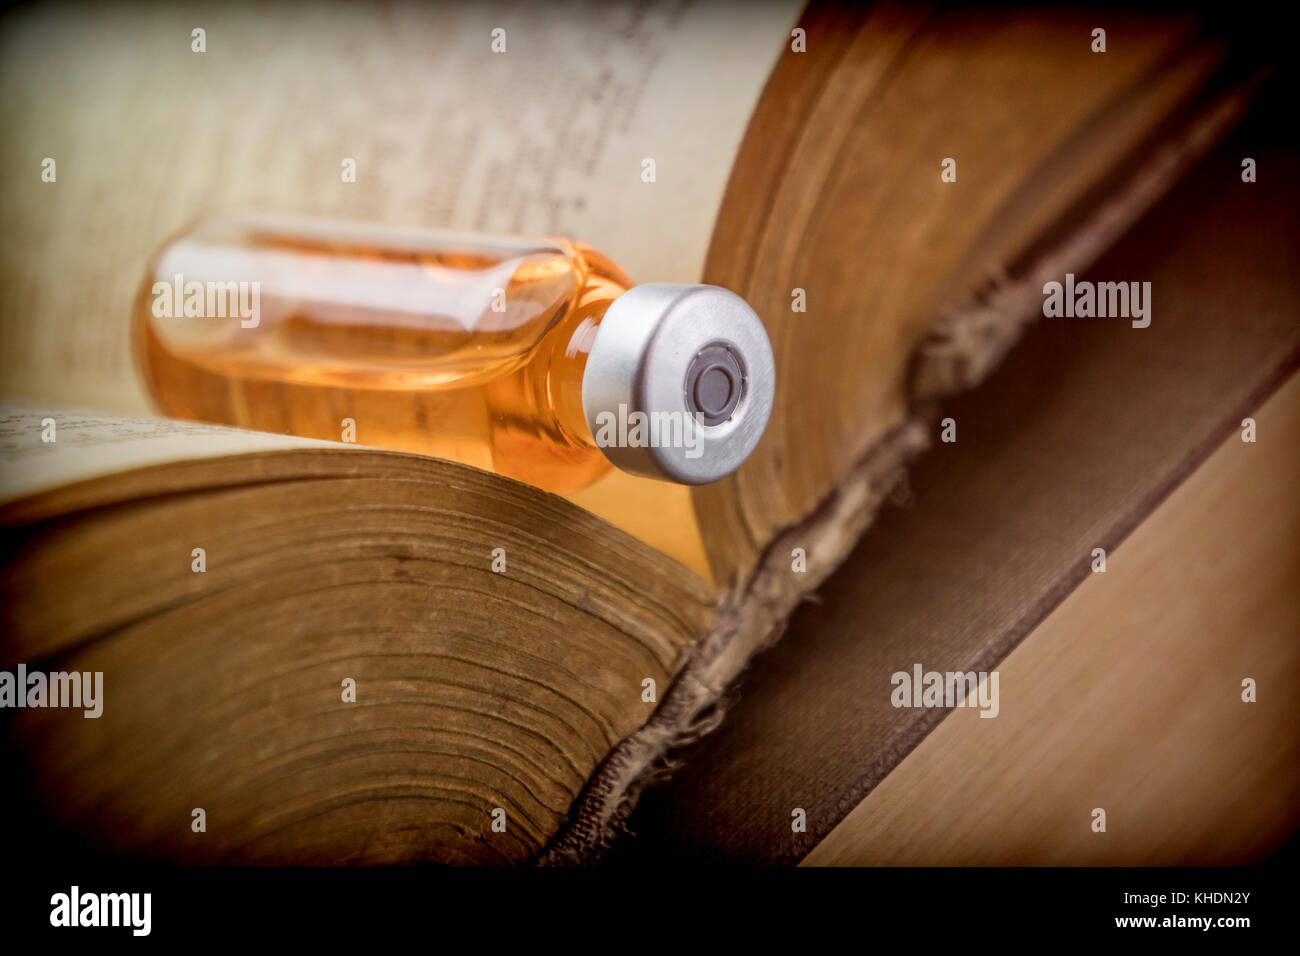 Vial On An Old Book Of Medicine, Conceptual Image Stock Photo